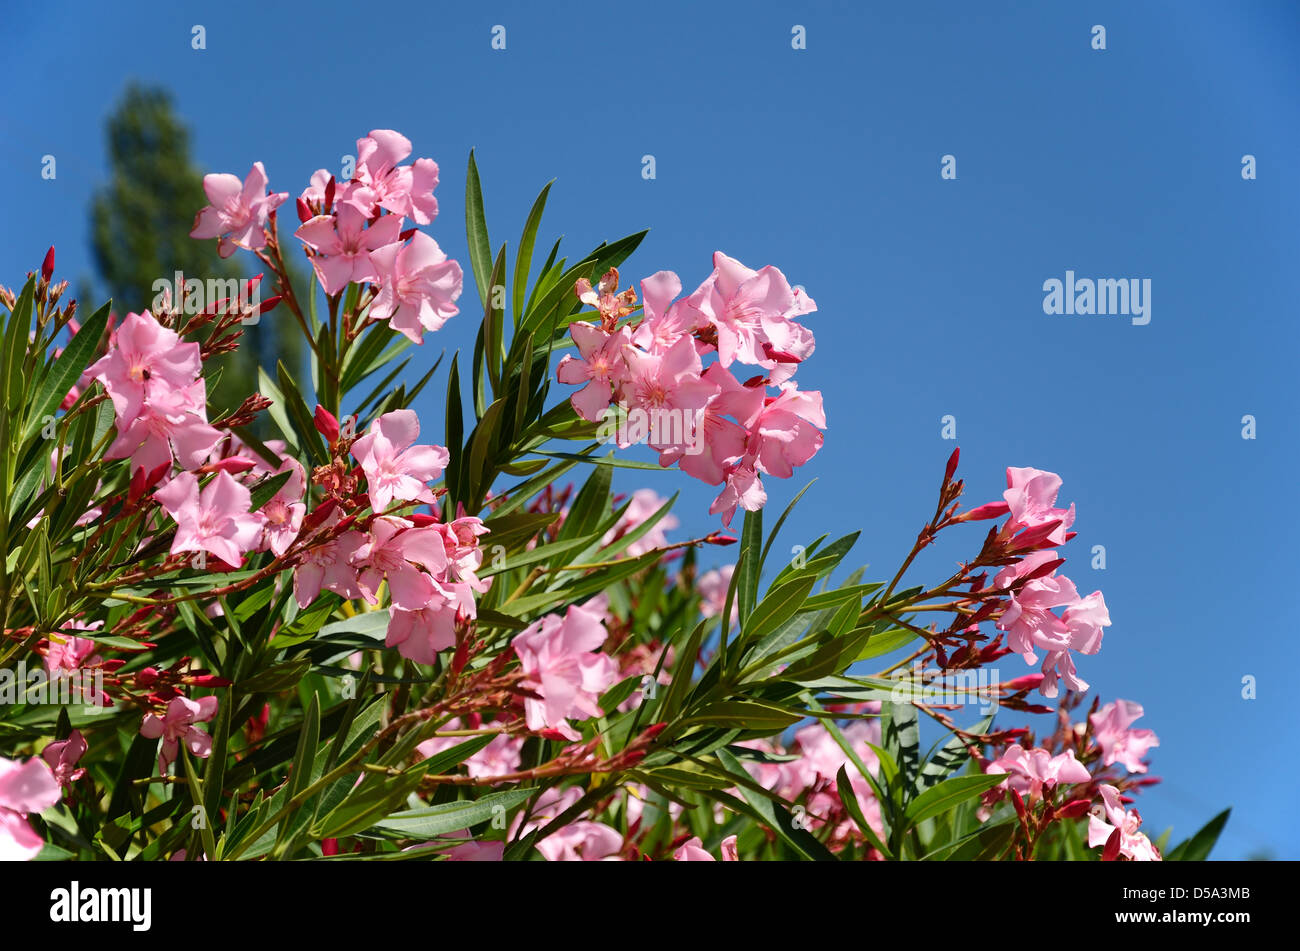 Flowering rhododendron Stock Photo